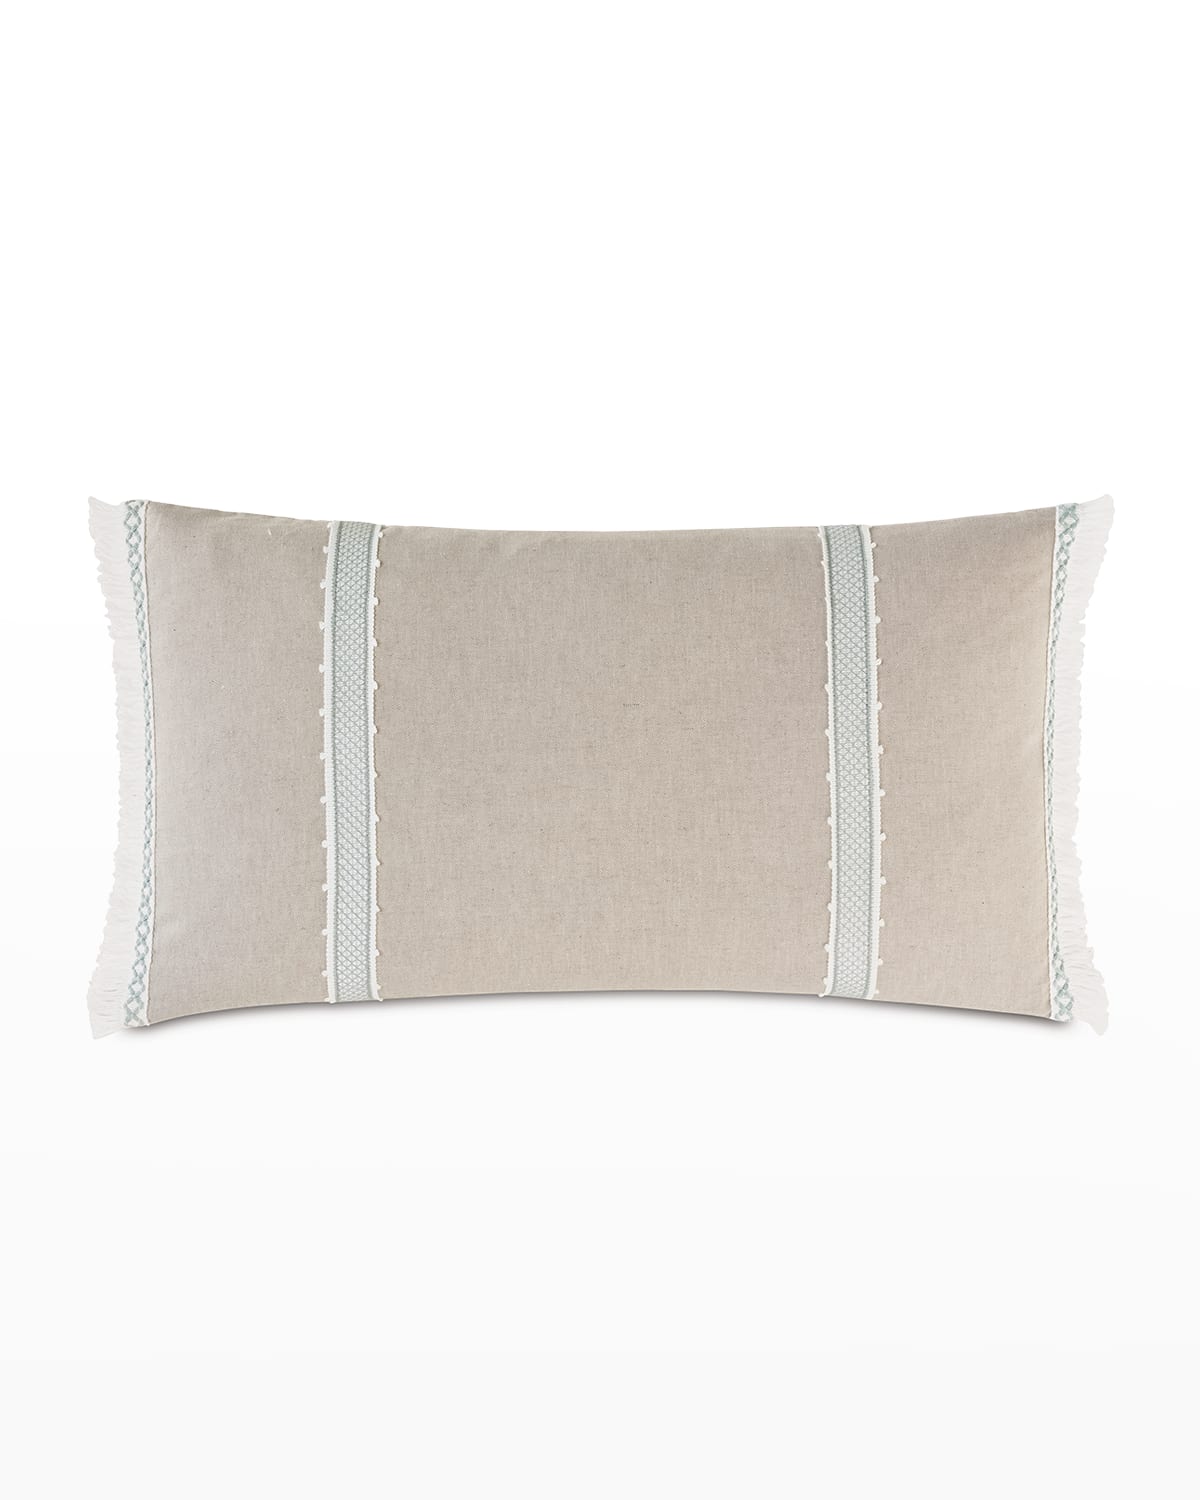 Shop Eastern Accents Amberlynn Picot Decorative Pillow - 15" X 26" In Wheat